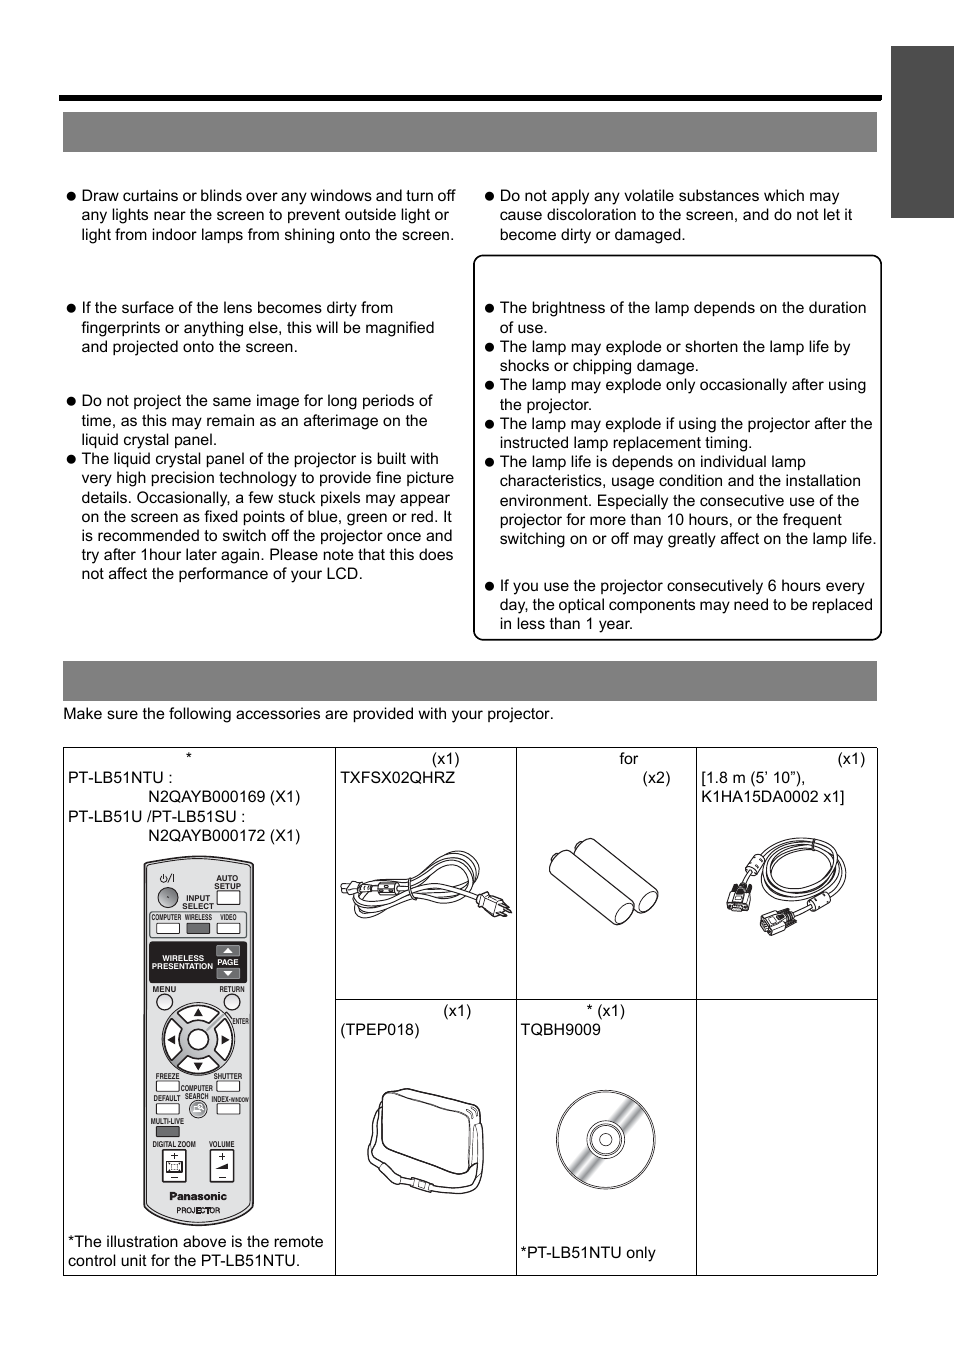 Cautions on use, Accessories, Cautions on use accessories | Nglish - 9, Precautions with regard to safety, Important information | Panasonic PT-LB51SU Manuel d'utilisation | Page 9 / 62